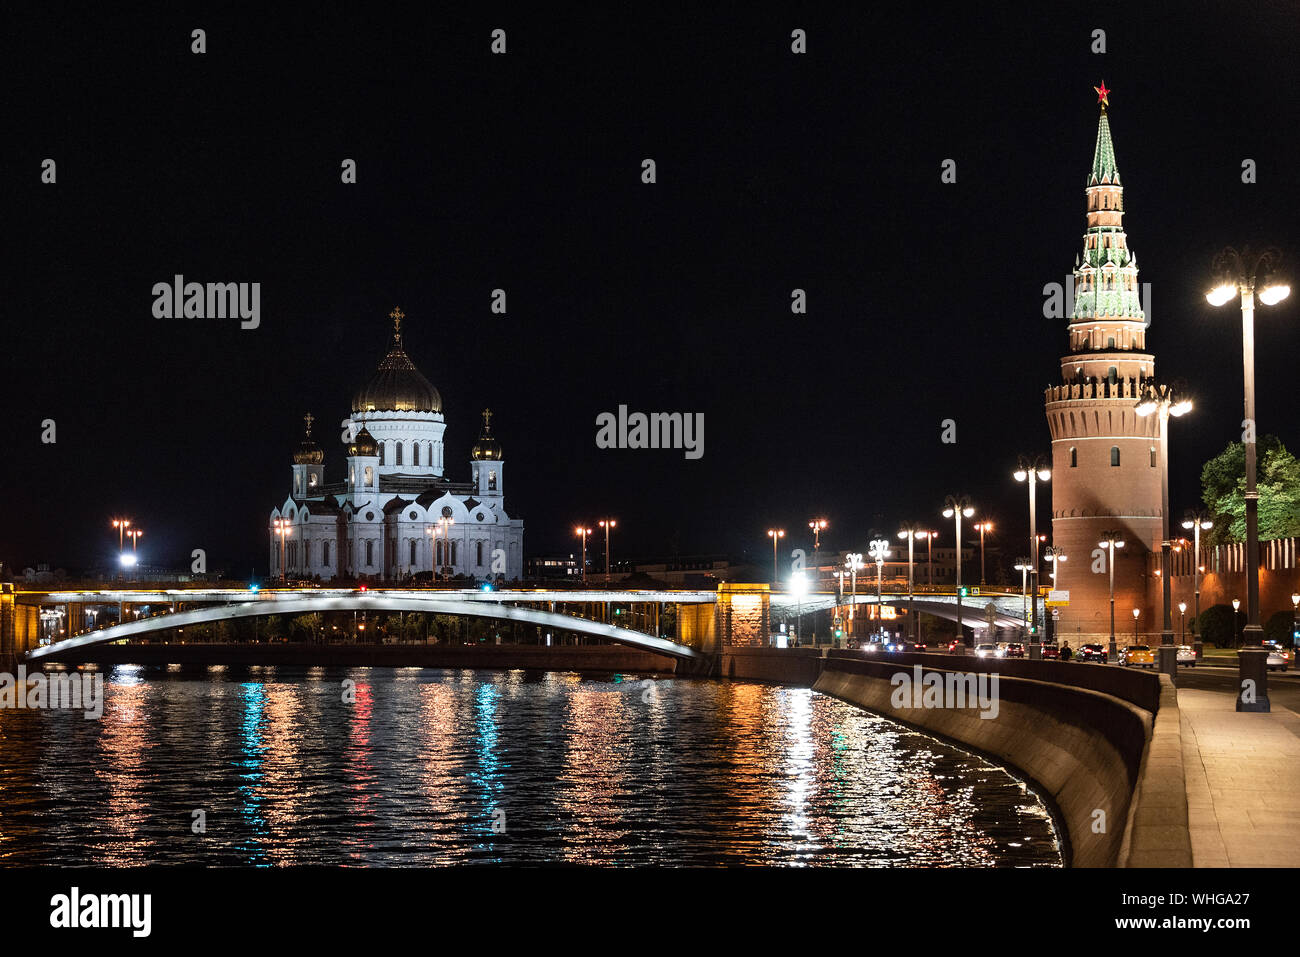 The beautiful city of Moscow in Russia at night. Stock Photo